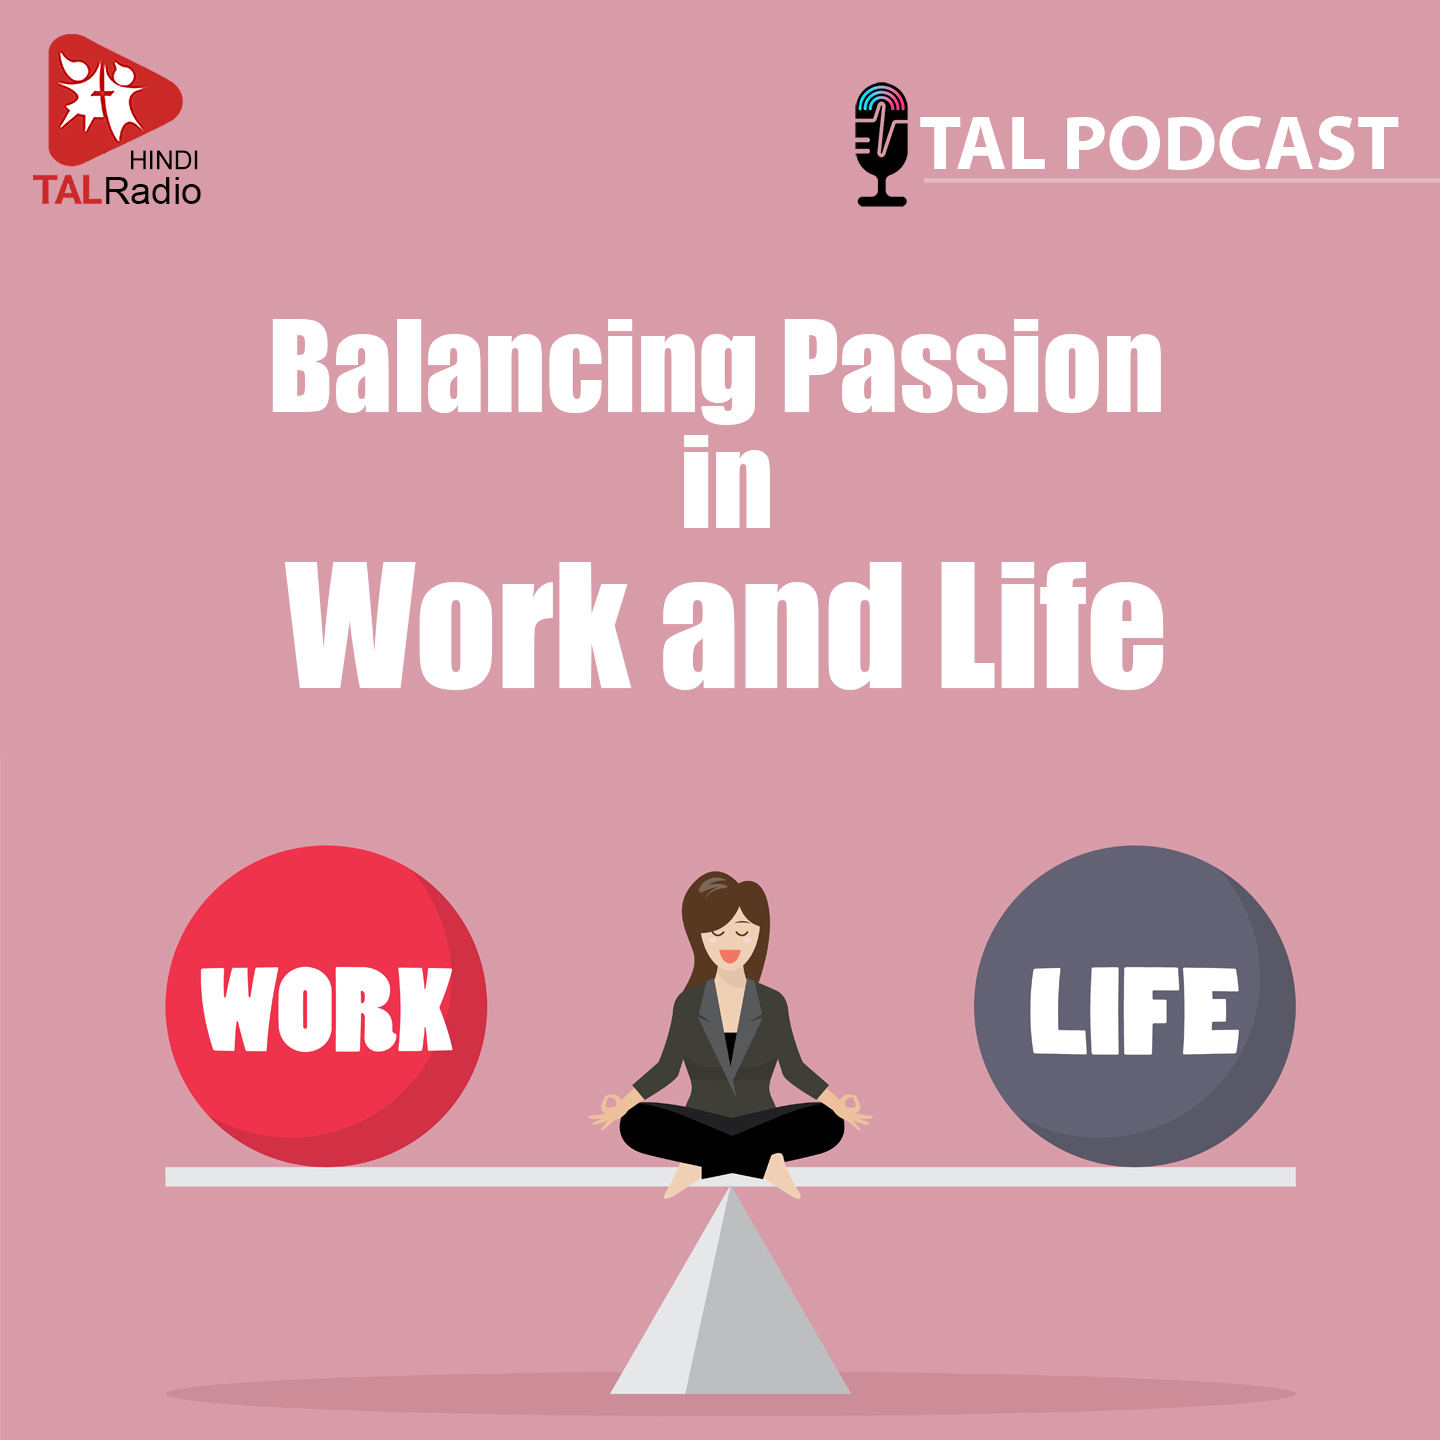 Balancing Passion in Work and Life